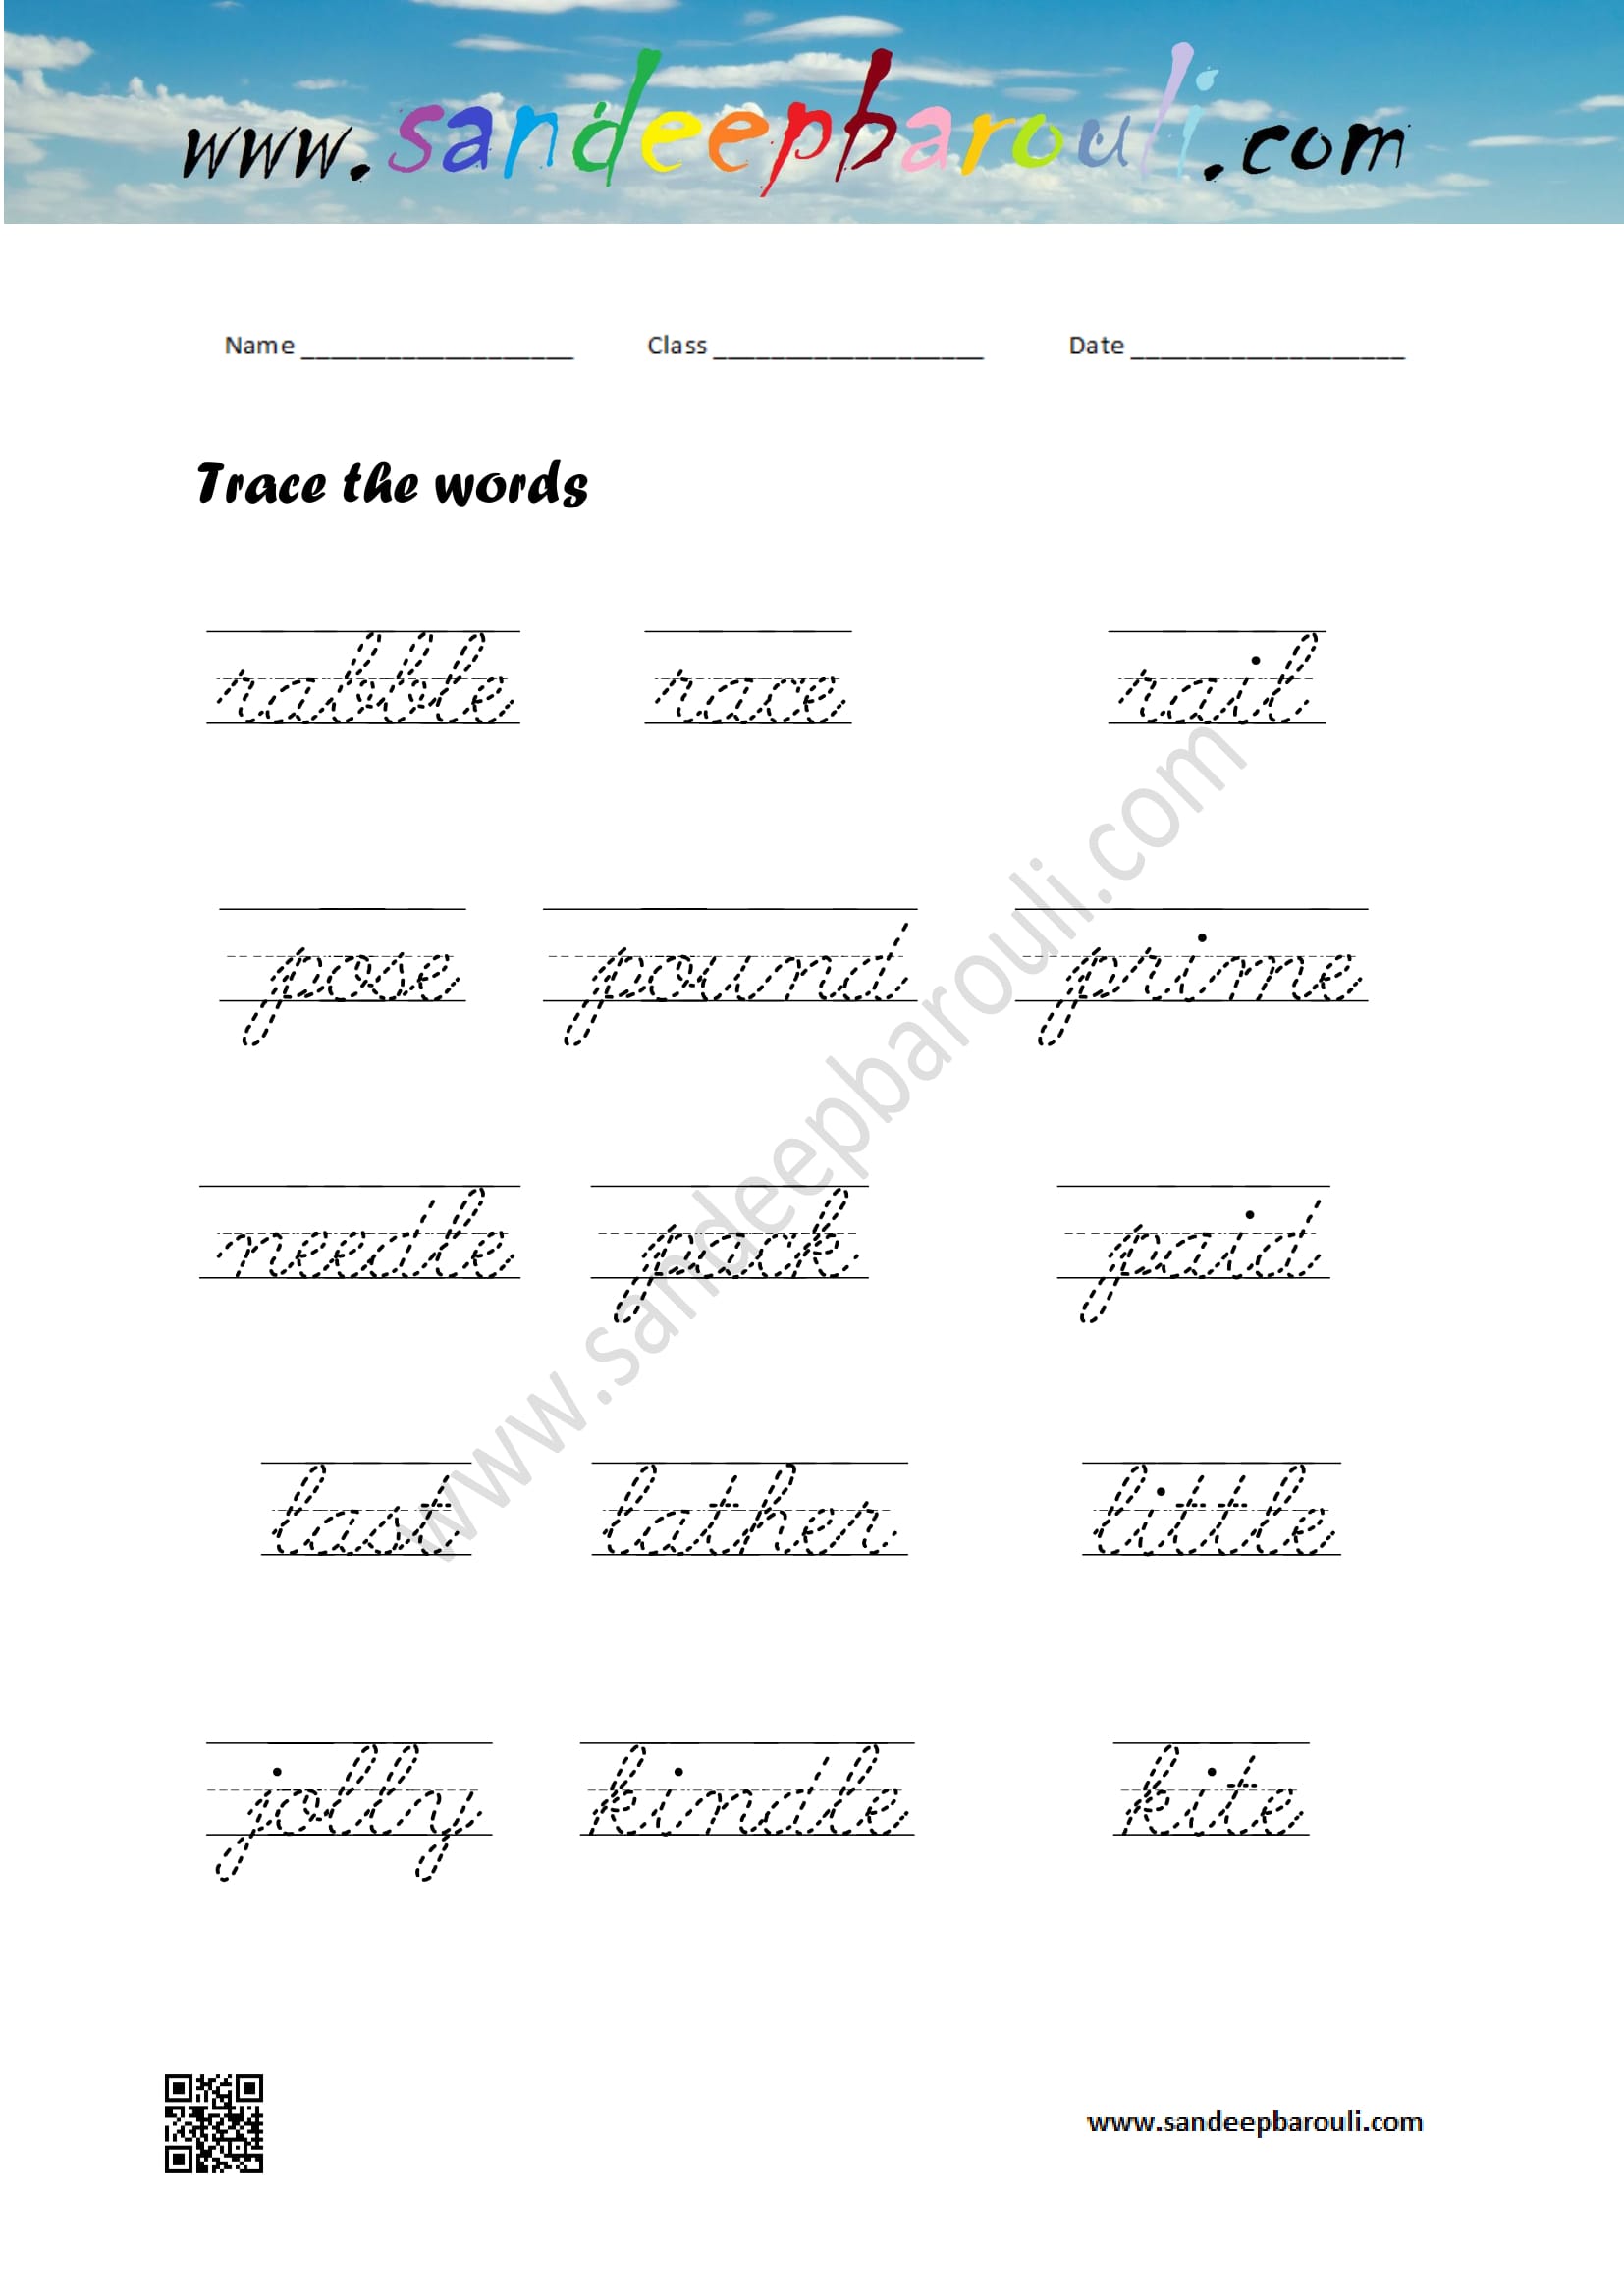 Cursive Writing Worksheet – Trace the words (71)